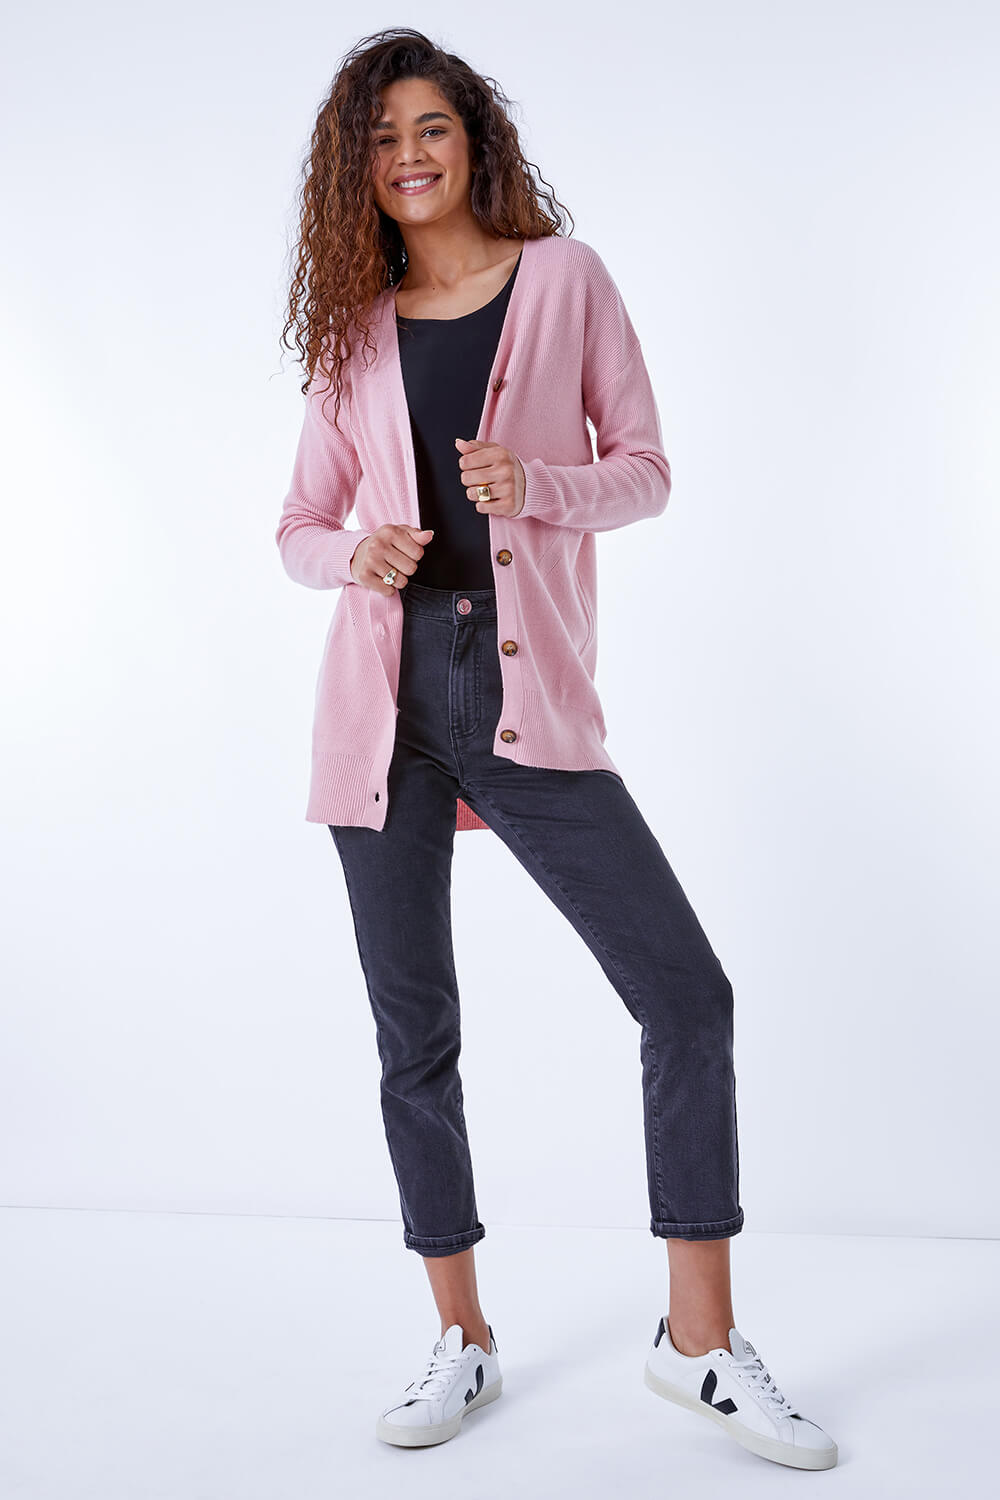 PINK Longline Buttoned Cardigan, Image 4 of 5